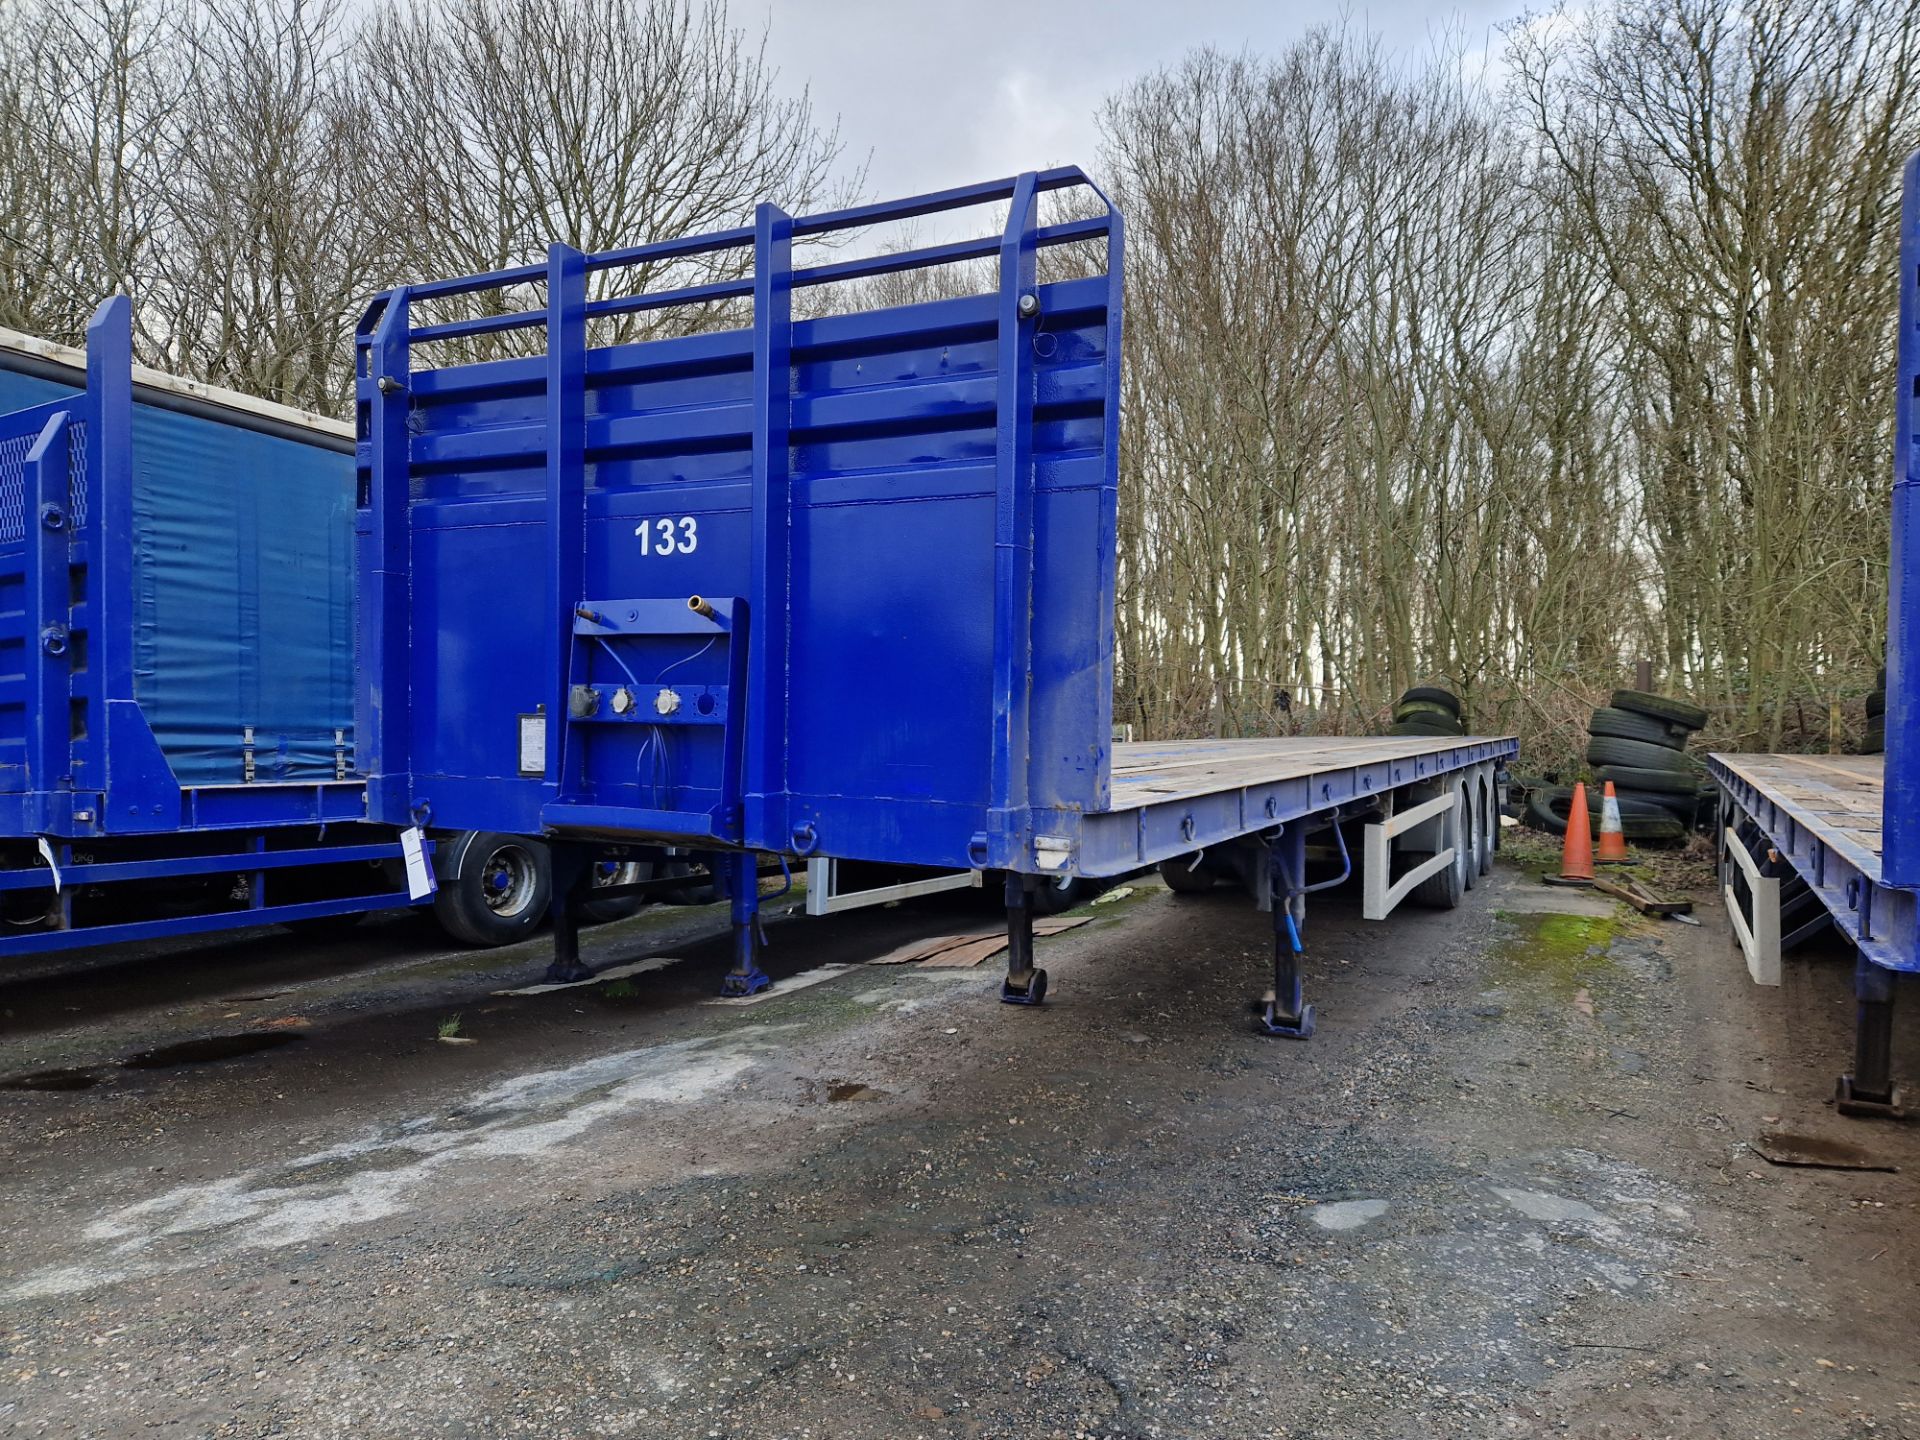 TIRSAN Tri Axle Flatbed Trailer, Chassis No. C116158, Year of Manufacture 2002, Tested until 11/